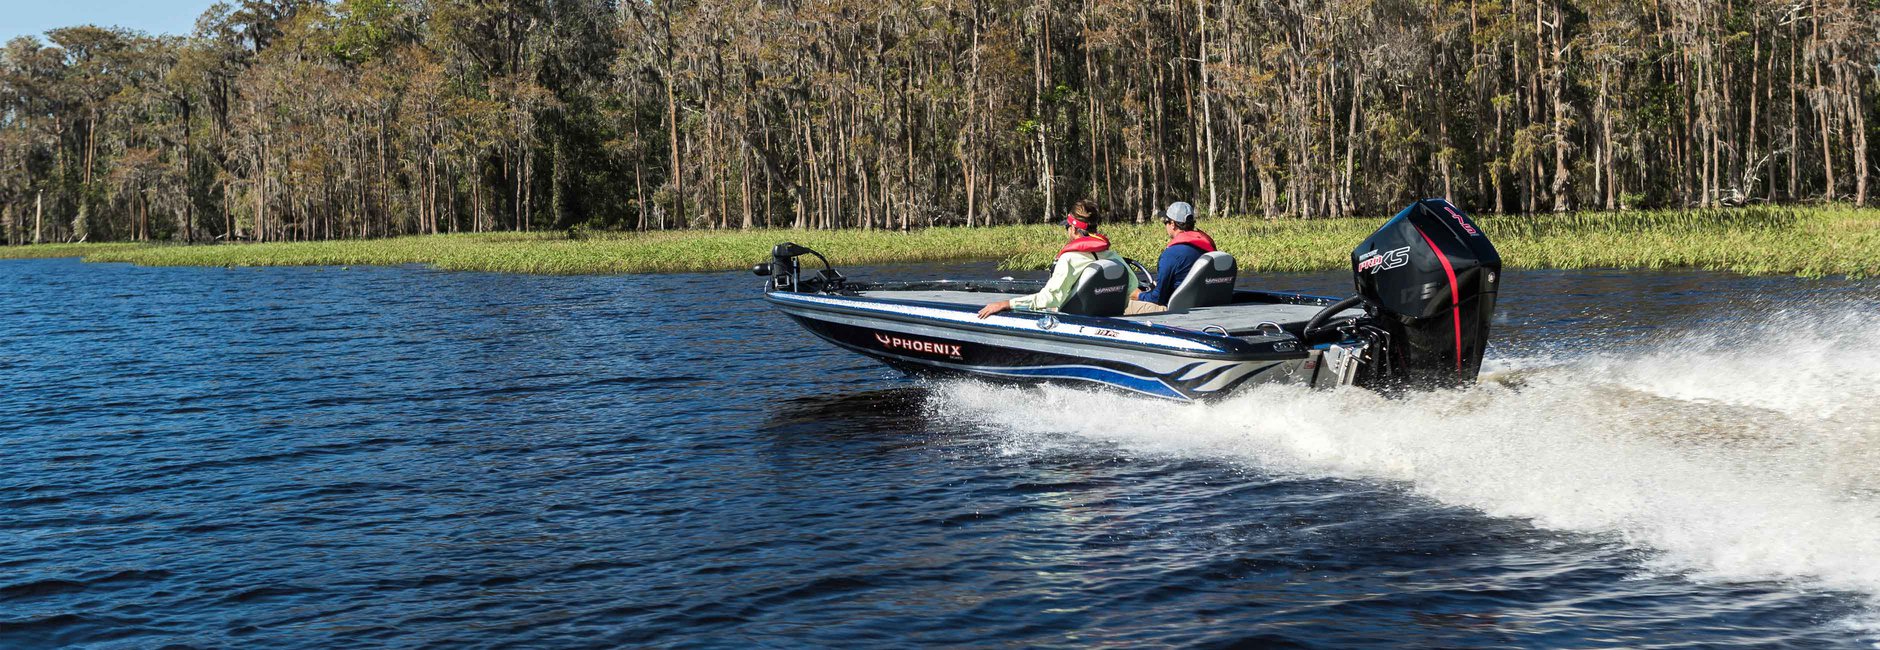 Two guys heading out to do some fishing with the boat powered by a Mercury Marine outboard motor.